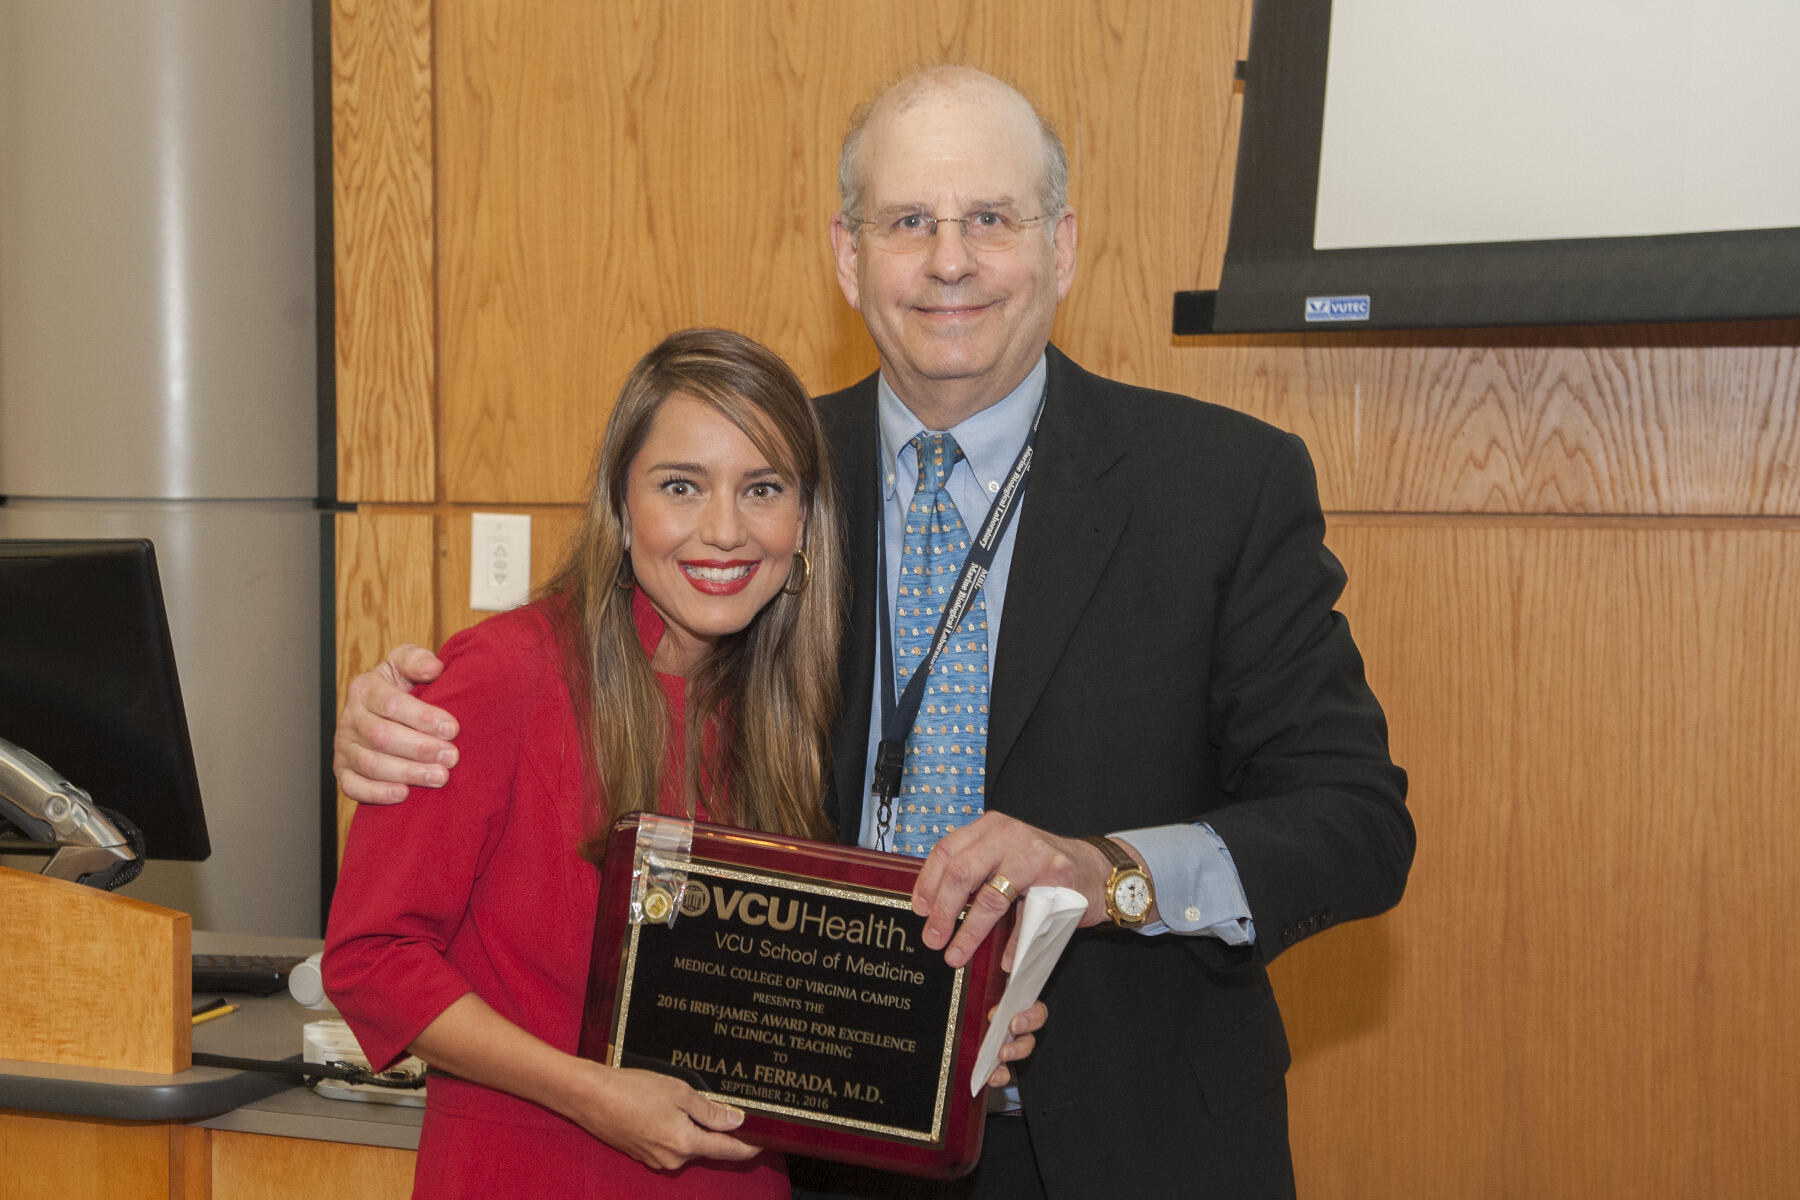 Paula A. Ferrada (left), M.D., associate professor in the Department of Surgery, was one of this year’s recipients of the Irby-James Award for Excellence in Clinical Teaching, which recognizes superior teaching in clinical medicine. Jerome Strauss (right), M.D., Ph.D., dean of VCU School of Medicine, presented the award.